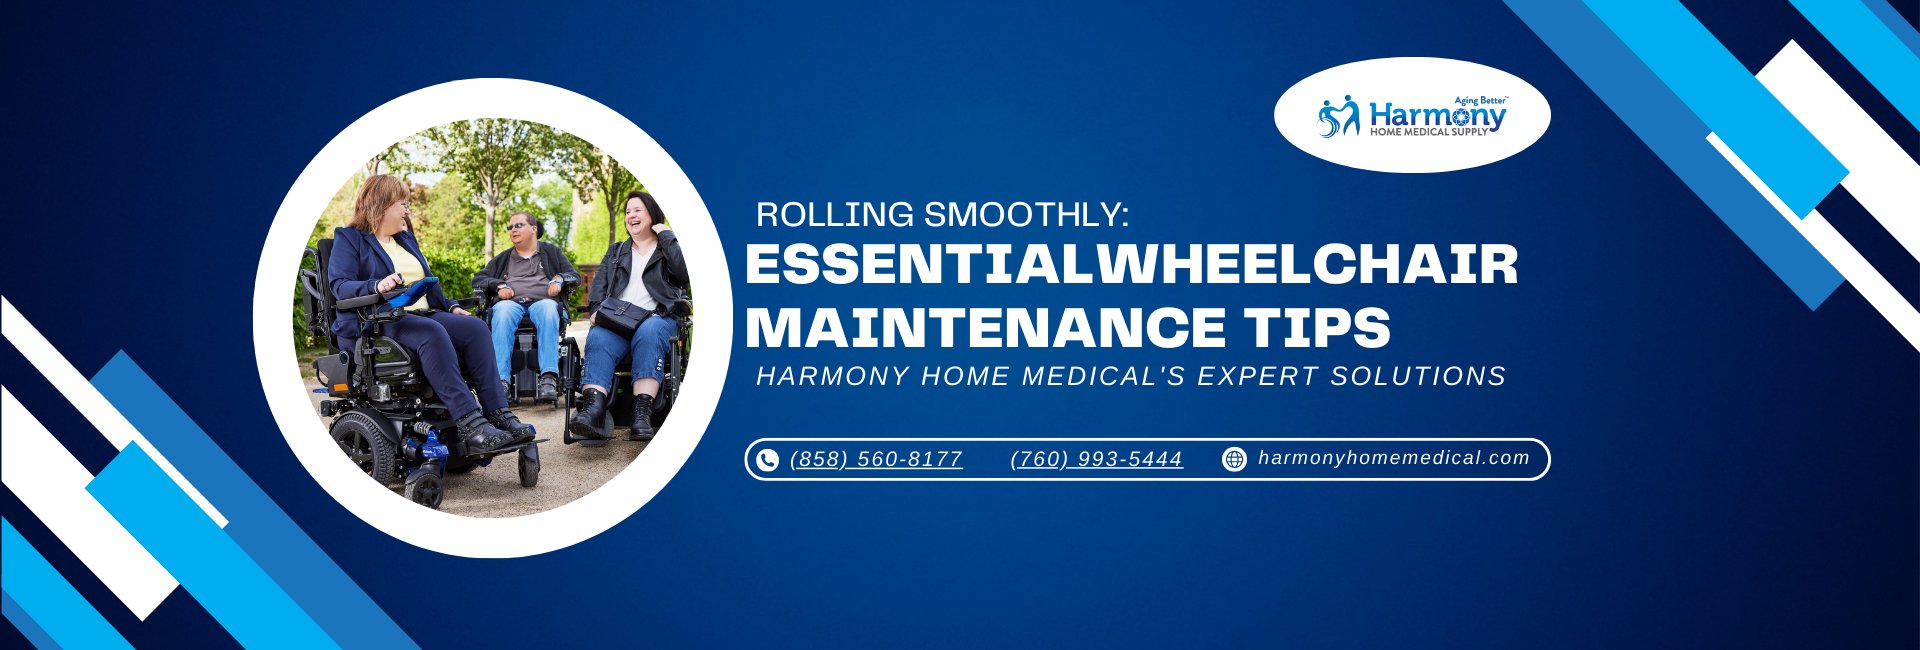 Wheelchairs Maintenance Tips from Harmony Home Medical